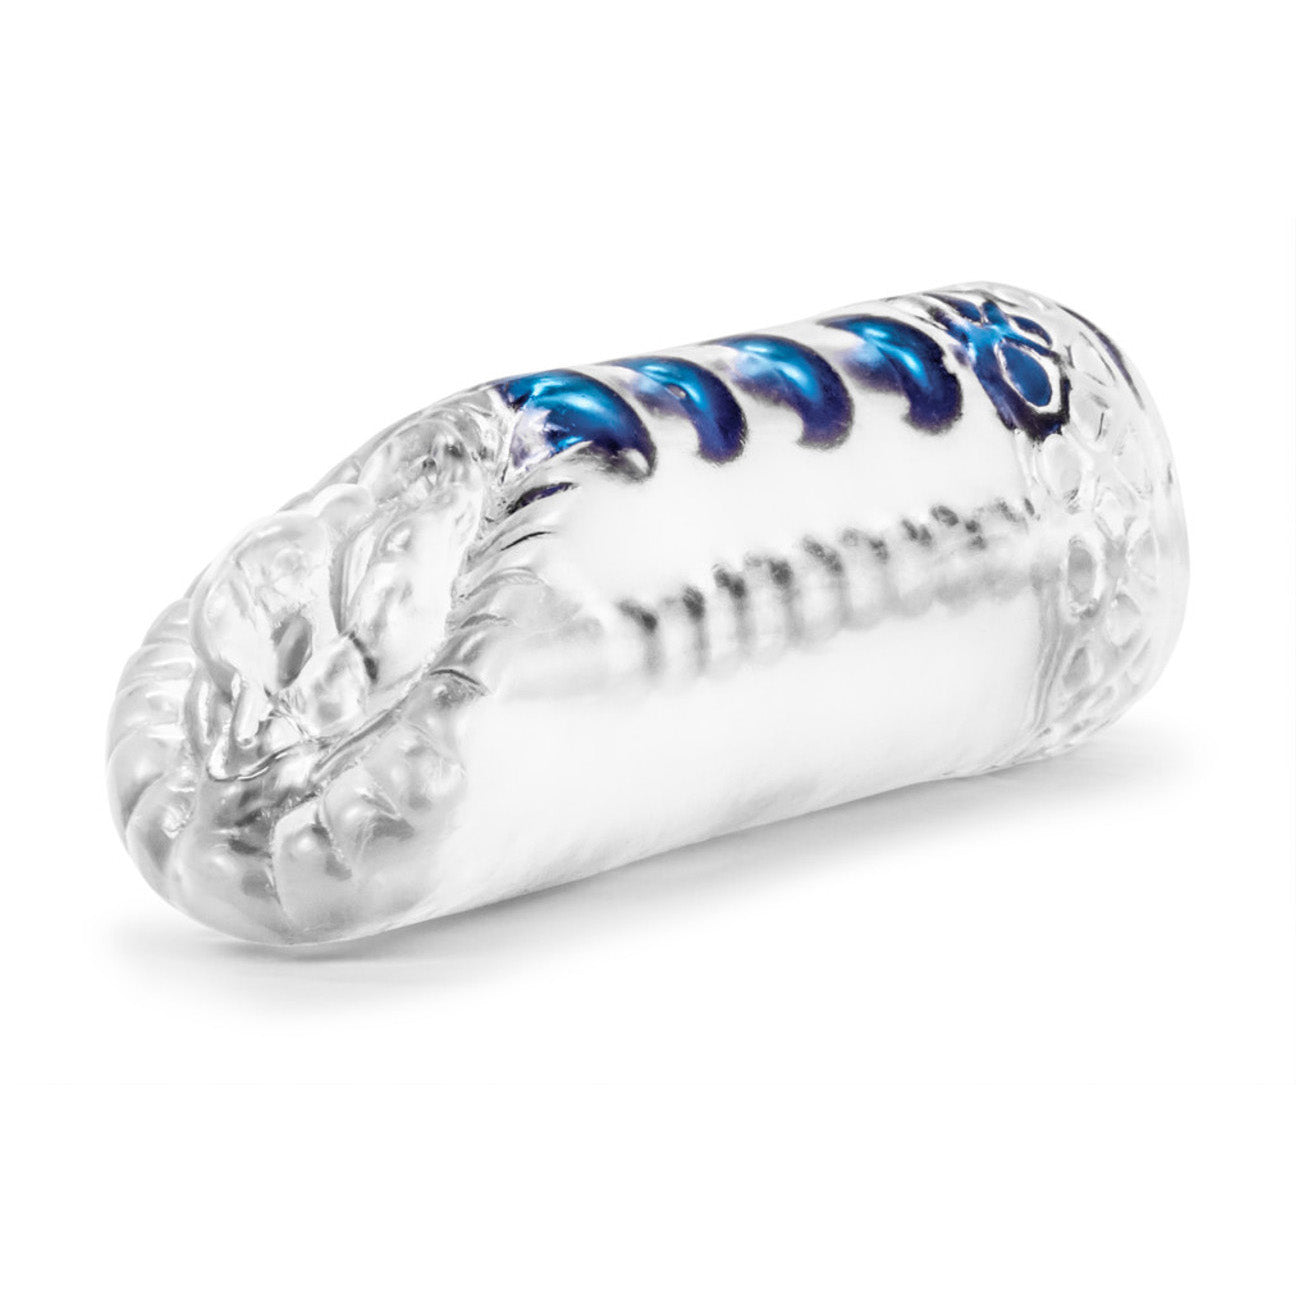 M for Men - Snatch - Clear - Thorn & Feather Sex Toy Canada